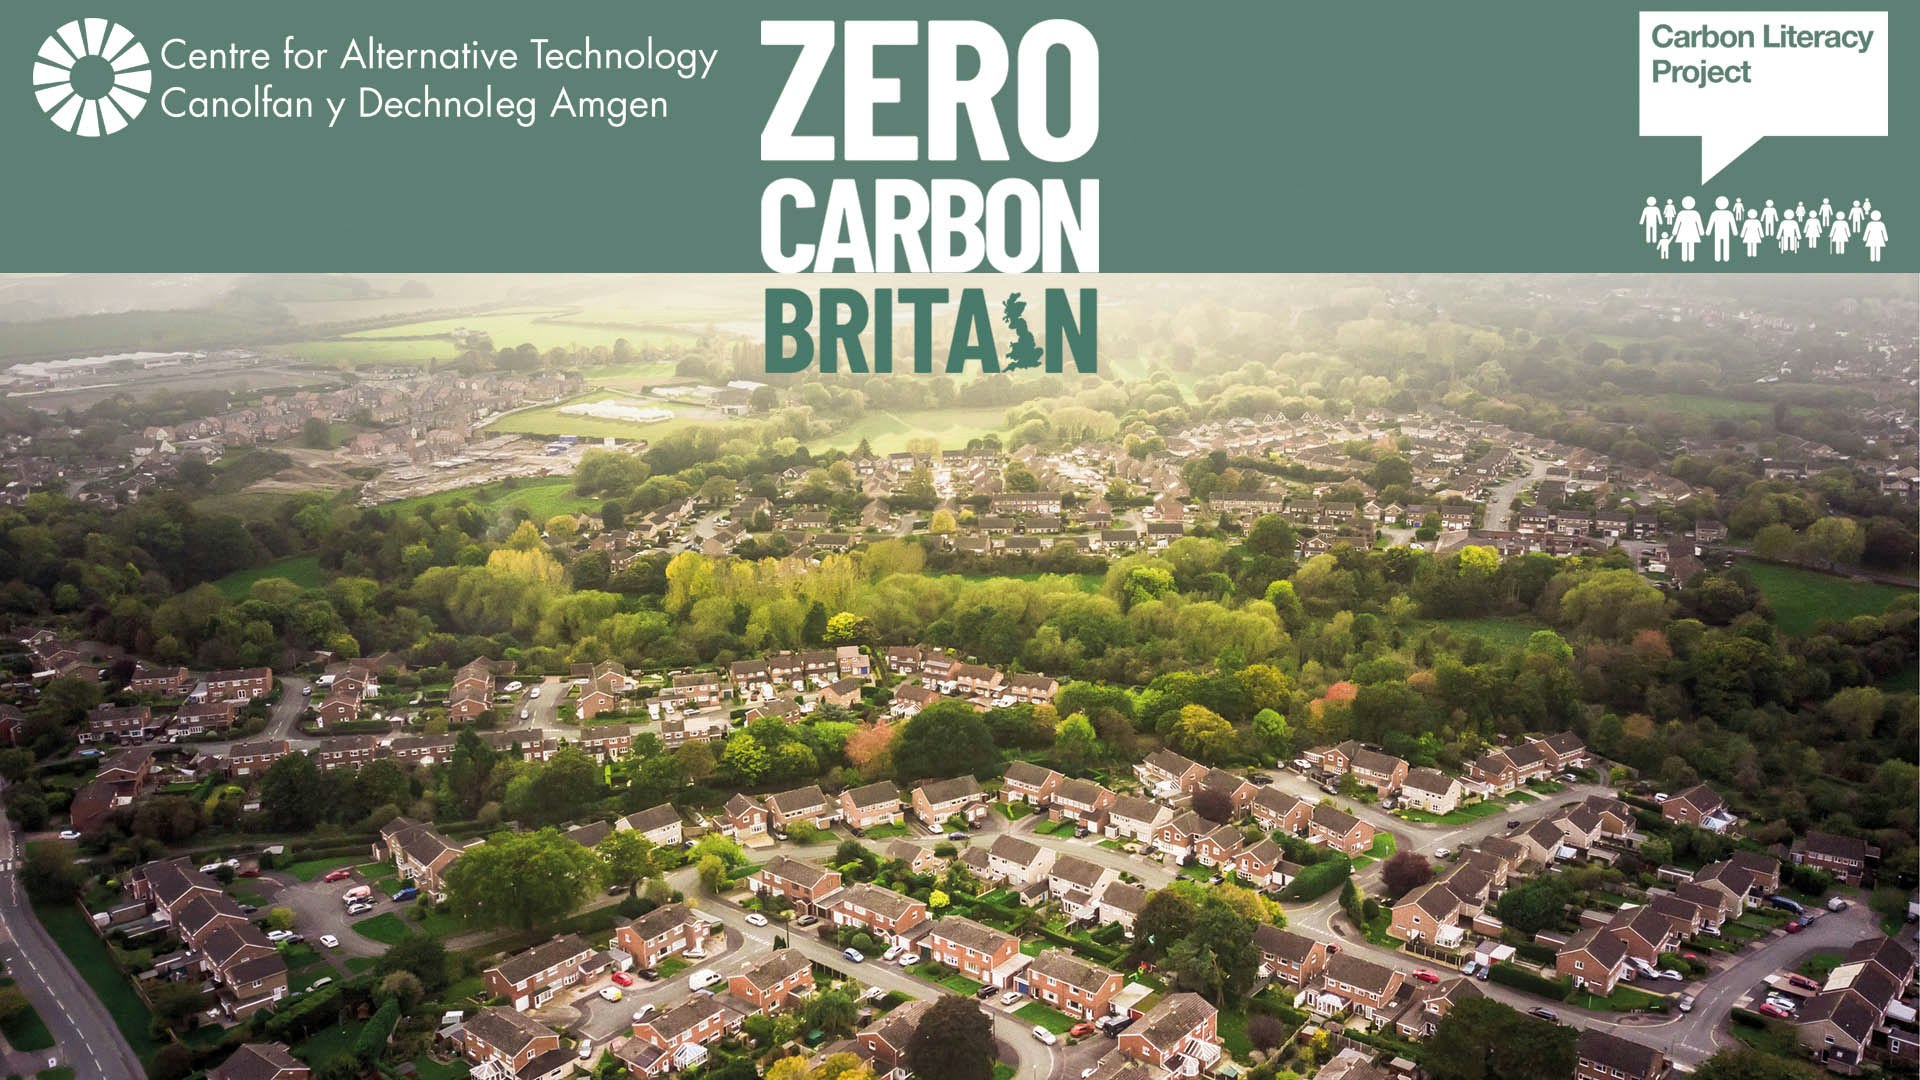 Aerial view of a town with Zero Carbon Britain logo